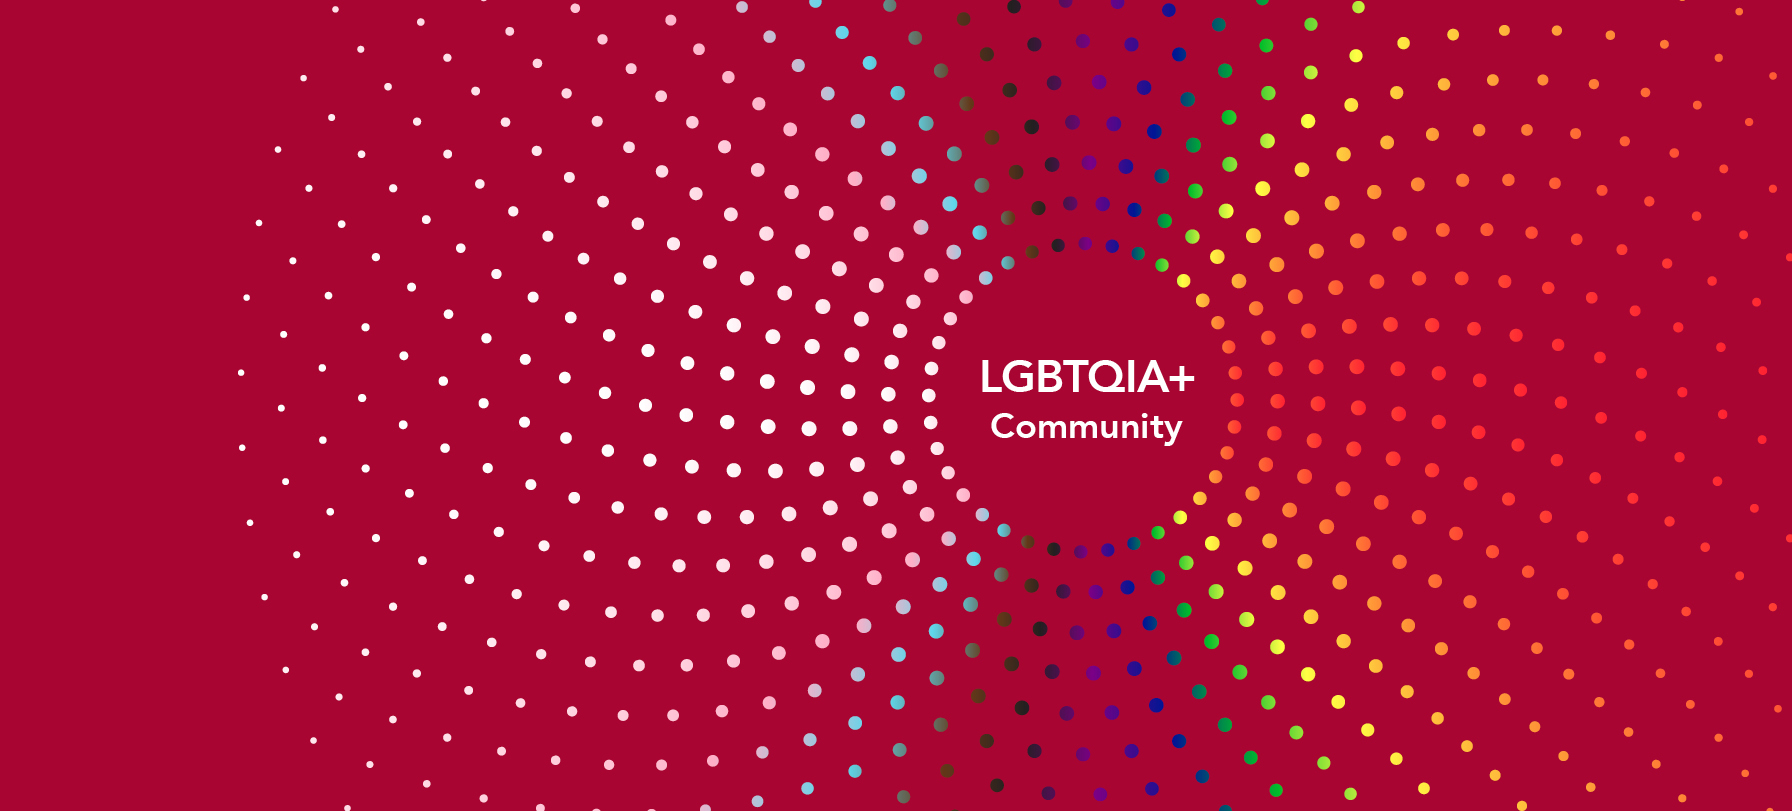 rainbow circle on red background with lgbtqia